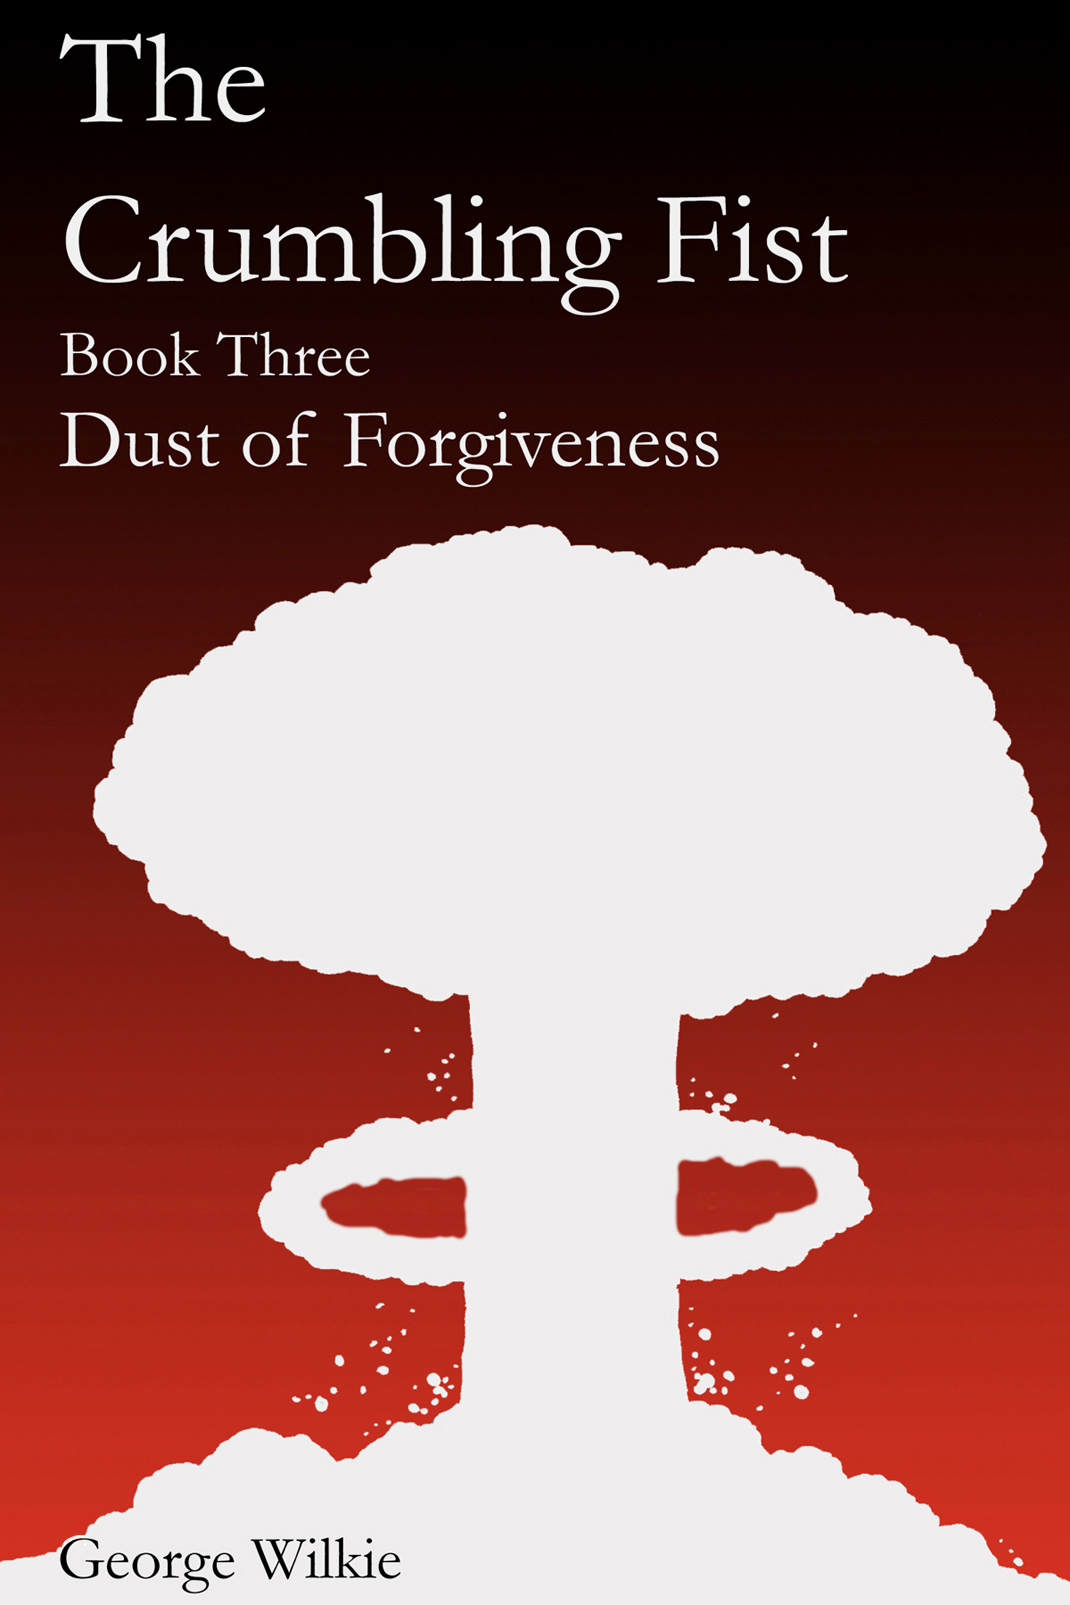 The crumbling fist book one